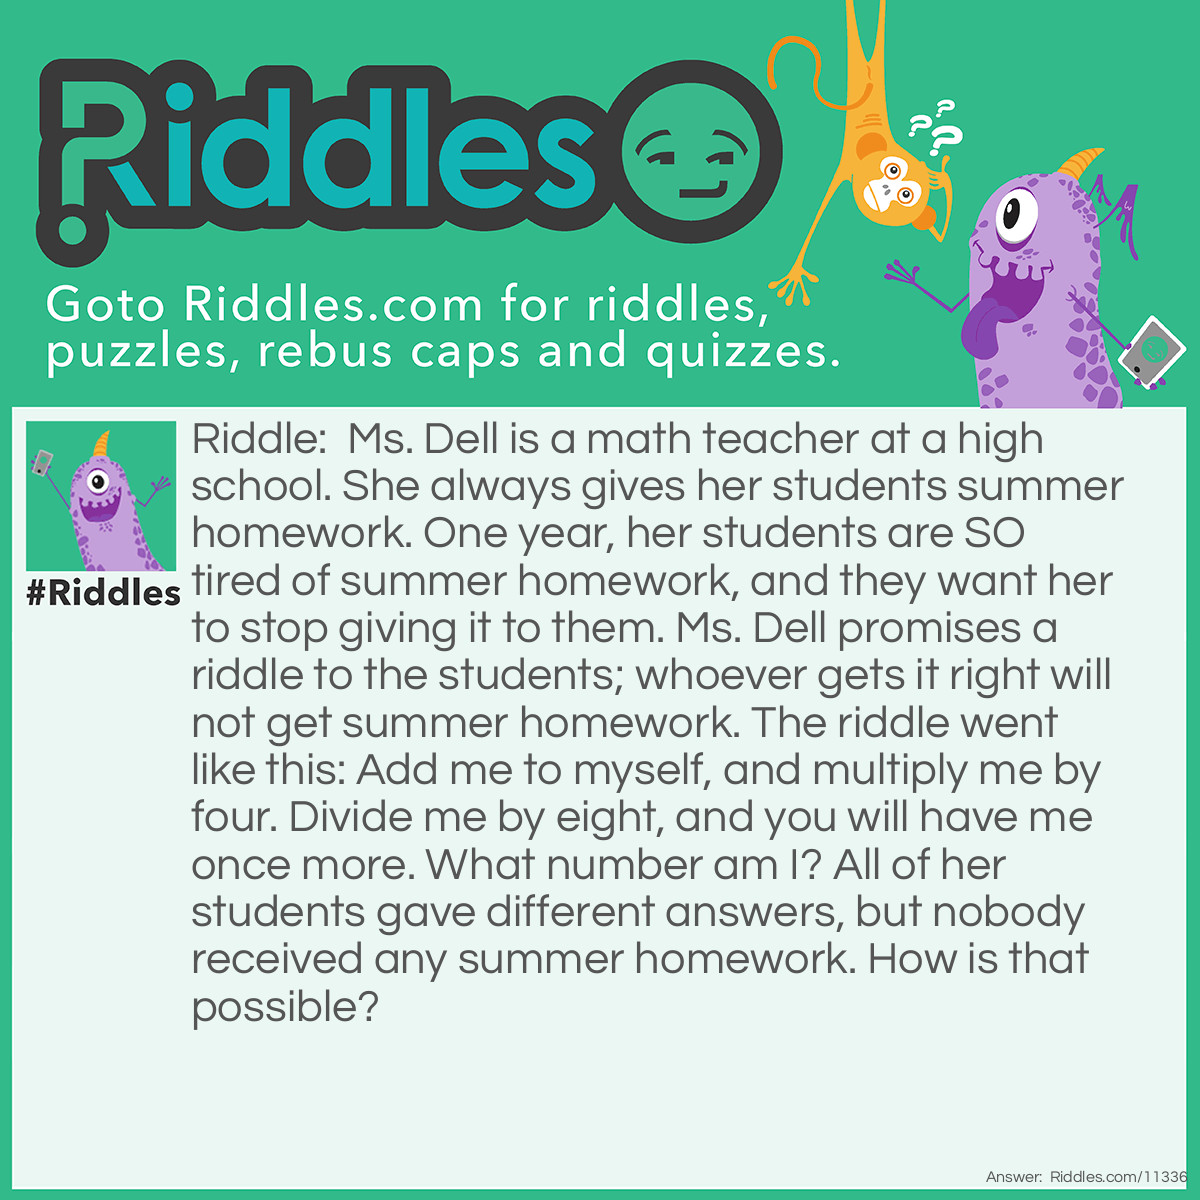 Riddle: Ms. Dell is a math teacher at a high school. She always gives her students summer homework. One year, her students are SO tired of summer homework, and they want her to stop giving it to them. Ms. Dell promises a riddle to the students; whoever gets it right will not get summer homework. The riddle went like this: Add me to myself, and multiply me by four. Divide me by eight, and you will have me once more. What number am I? All of her students gave different answers, but nobody received any summer homework. How is that possible? Answer: All numbers work with Ms. Dell's riddle! ((x + x) * 4) / 8 will always equal x.